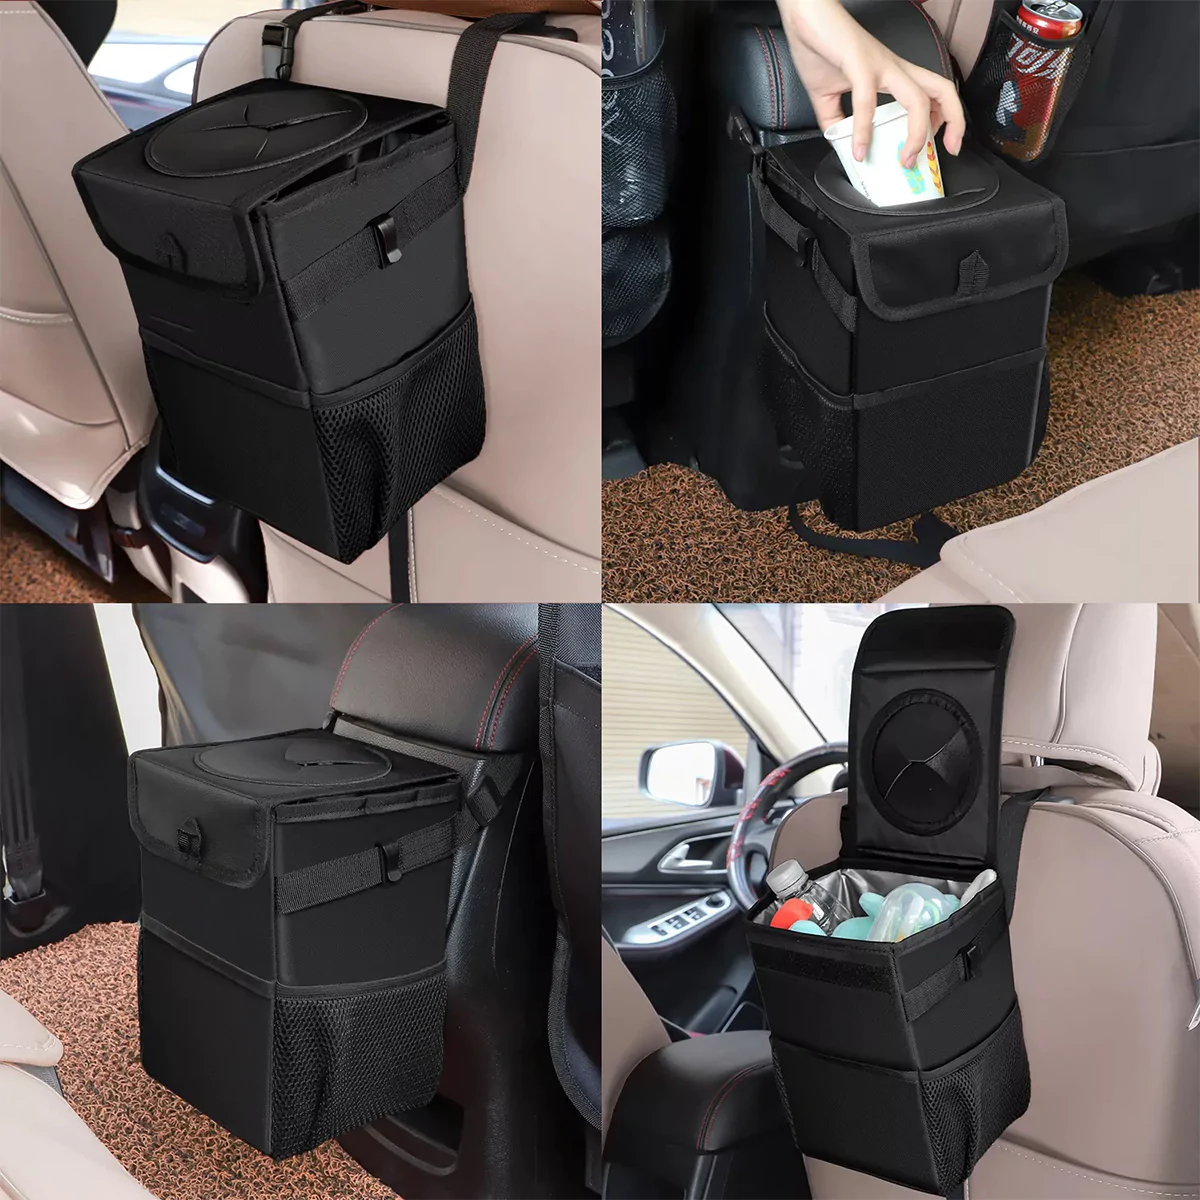 Waterproof Car Trash Can with Lid and Storage Pockets, Custom-Fit For Car, 100% Leak-Proof Car Organizer, Waterproof Car Garbage Can, Multipurpose Trash Bin for Car DLTS234